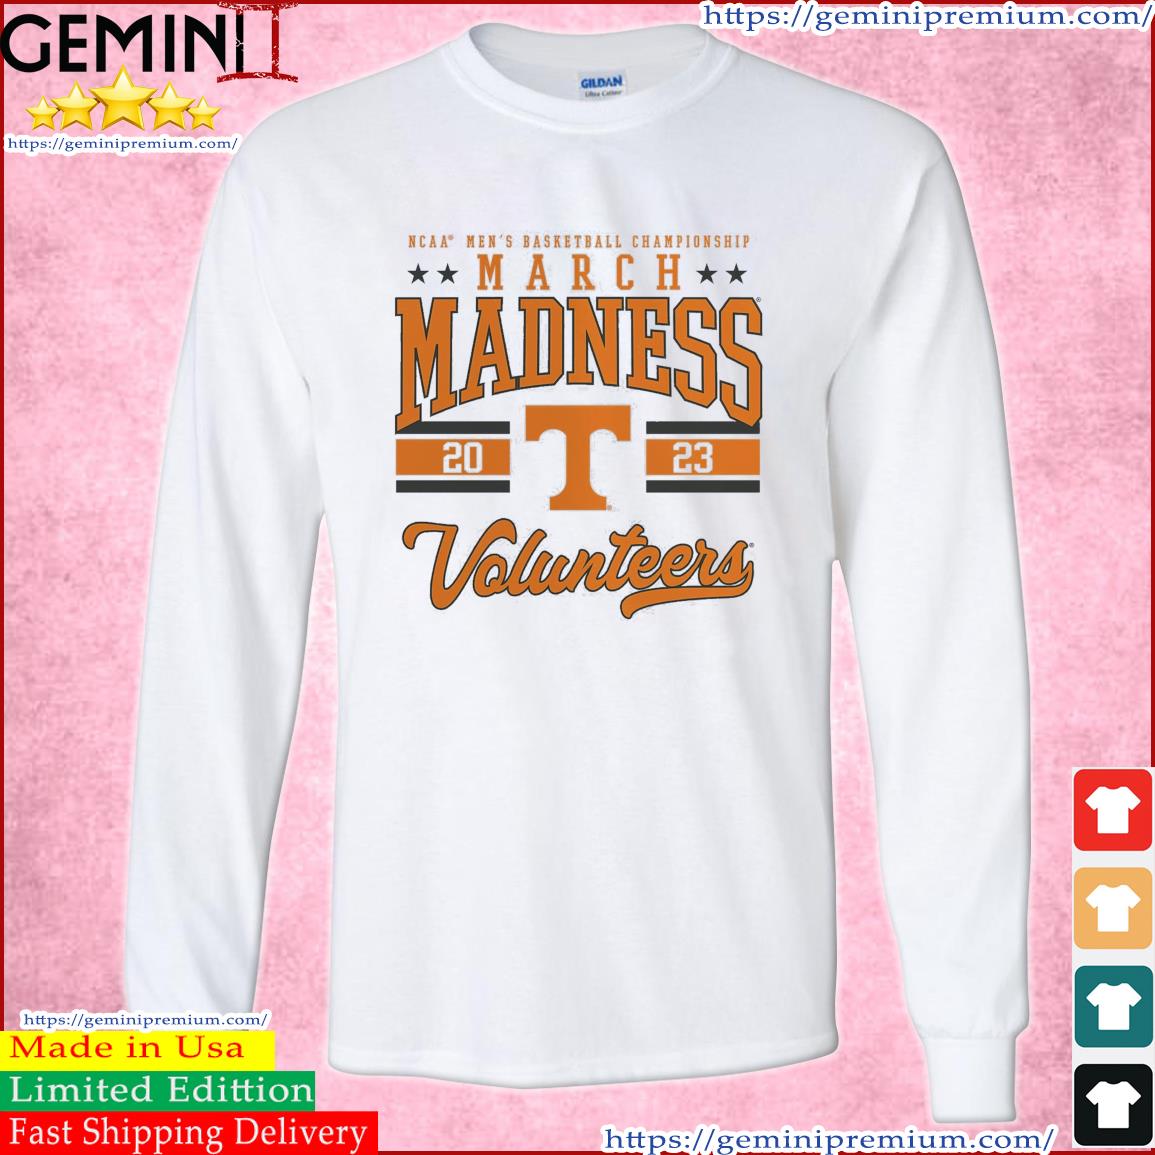 Tennessee Volunteers NCAA Men's Basketball Tournament March Madness 2023 Shirt Long Sleeve Tee